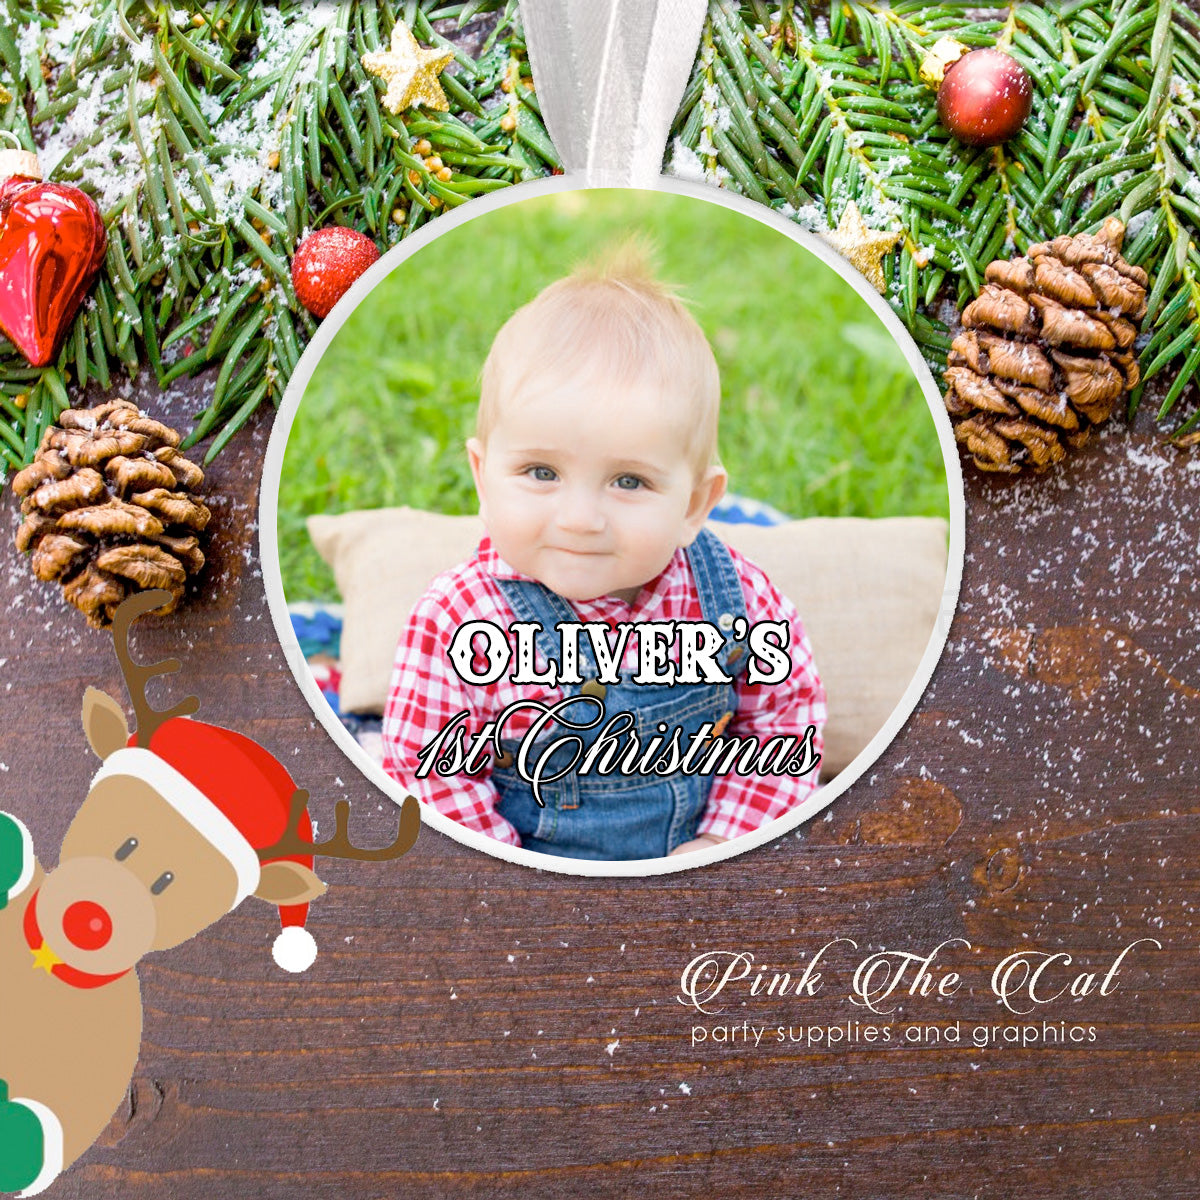 Personalized Christmas ornament with baby photo